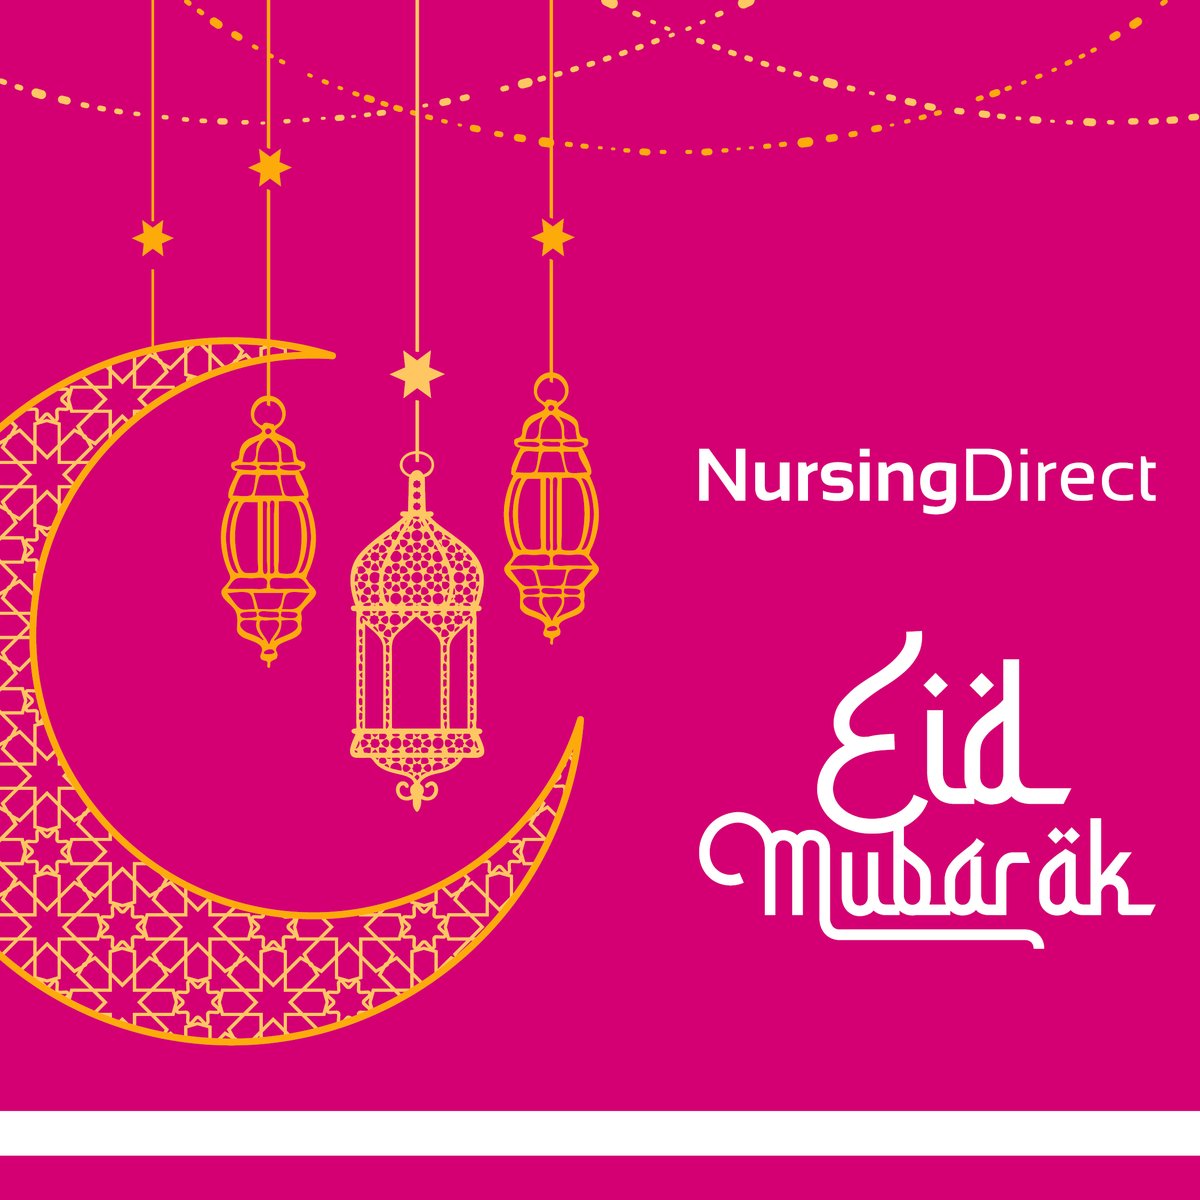 Eid Mubarak to all of our connections and candidates - from the team at Nursing Direct 🌙

May this Eid bring happiness, peace, blessings and prosperity! 🙌🏻

#NursingDirect #EidMubarak #Eid2023 #Ramadan2023